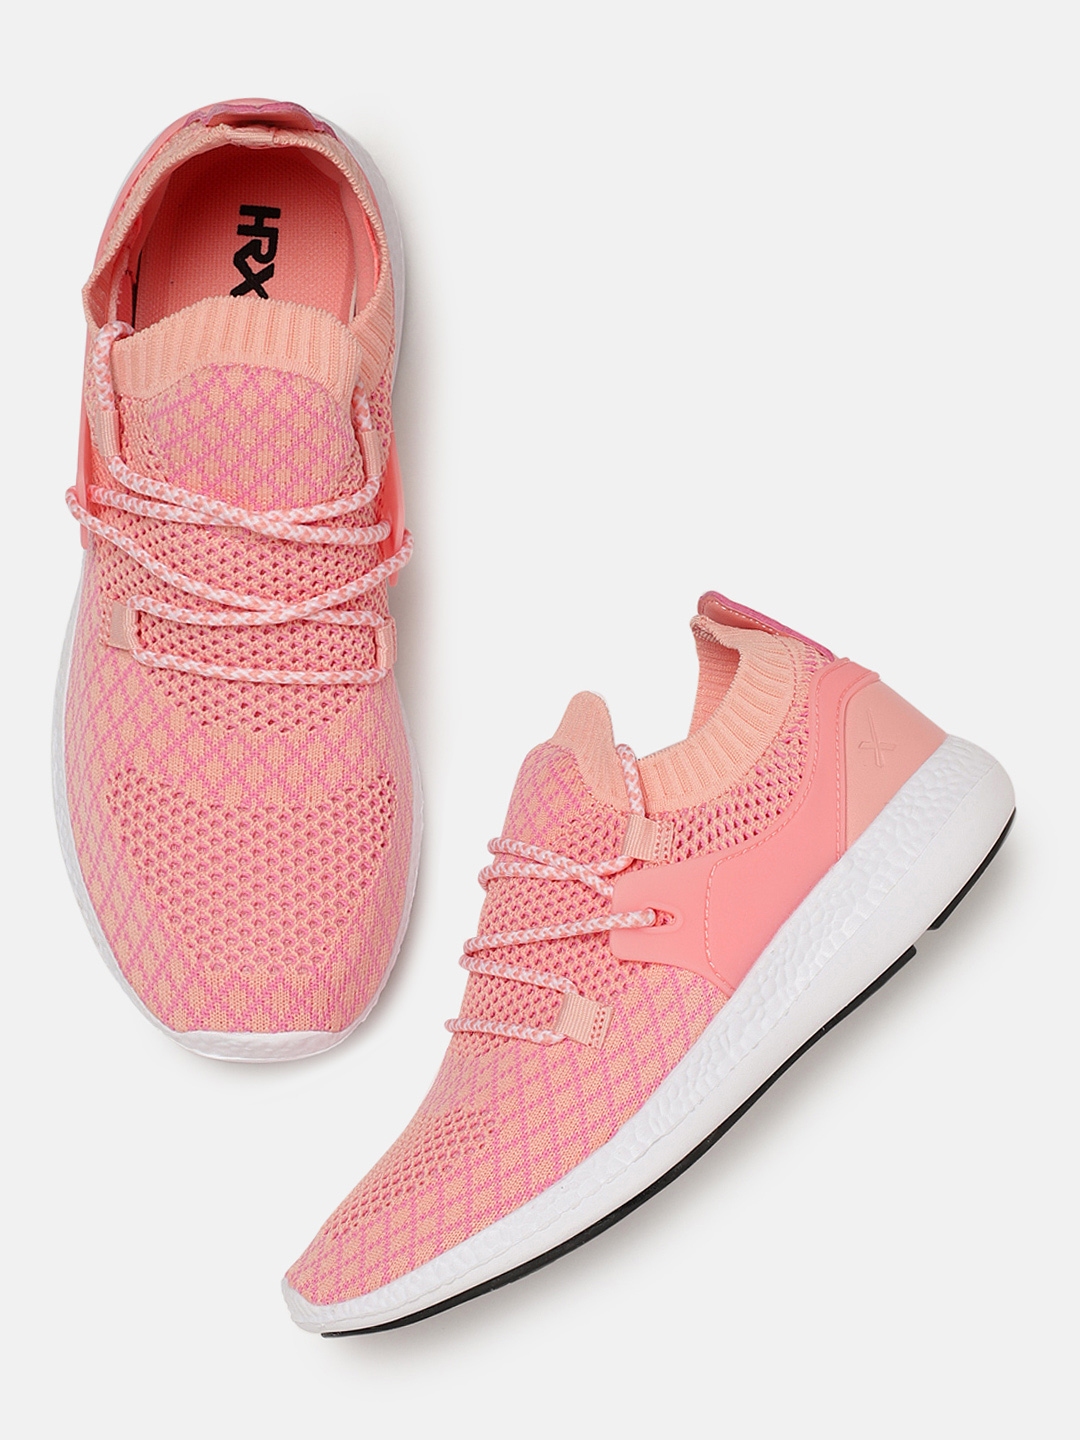 hrx shoes for women